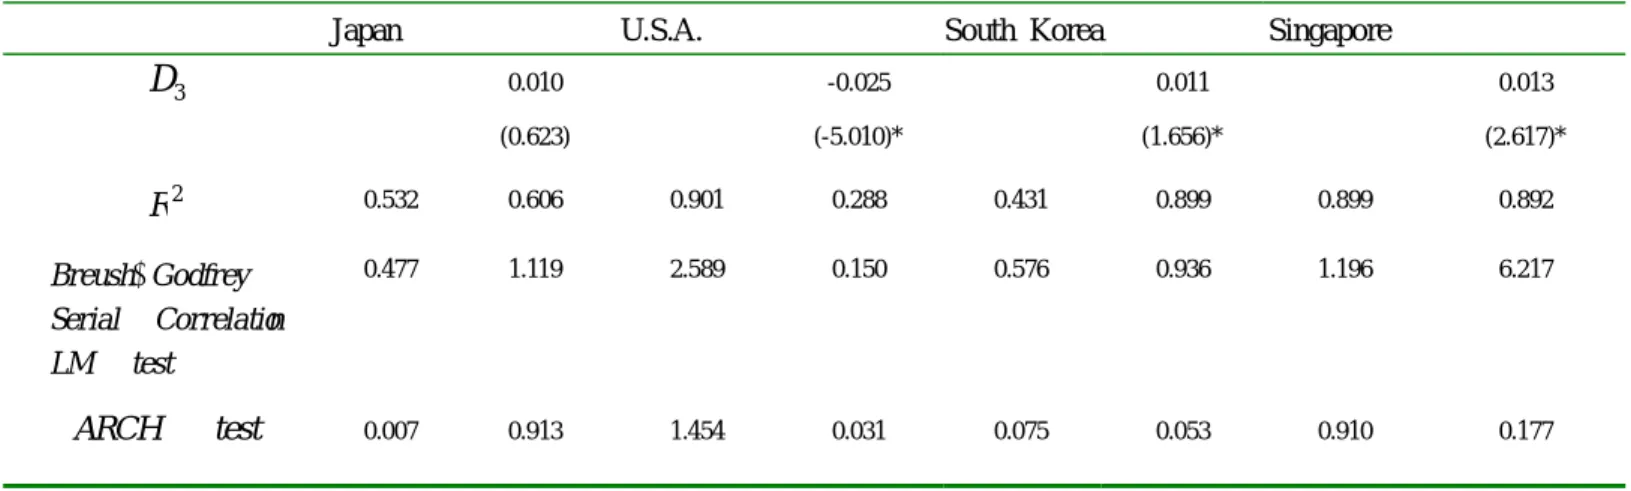 Table 3.Iterative seemingly unrelated regression of the dynamic AIDS model of International tourism demand for Taiwan (continue)